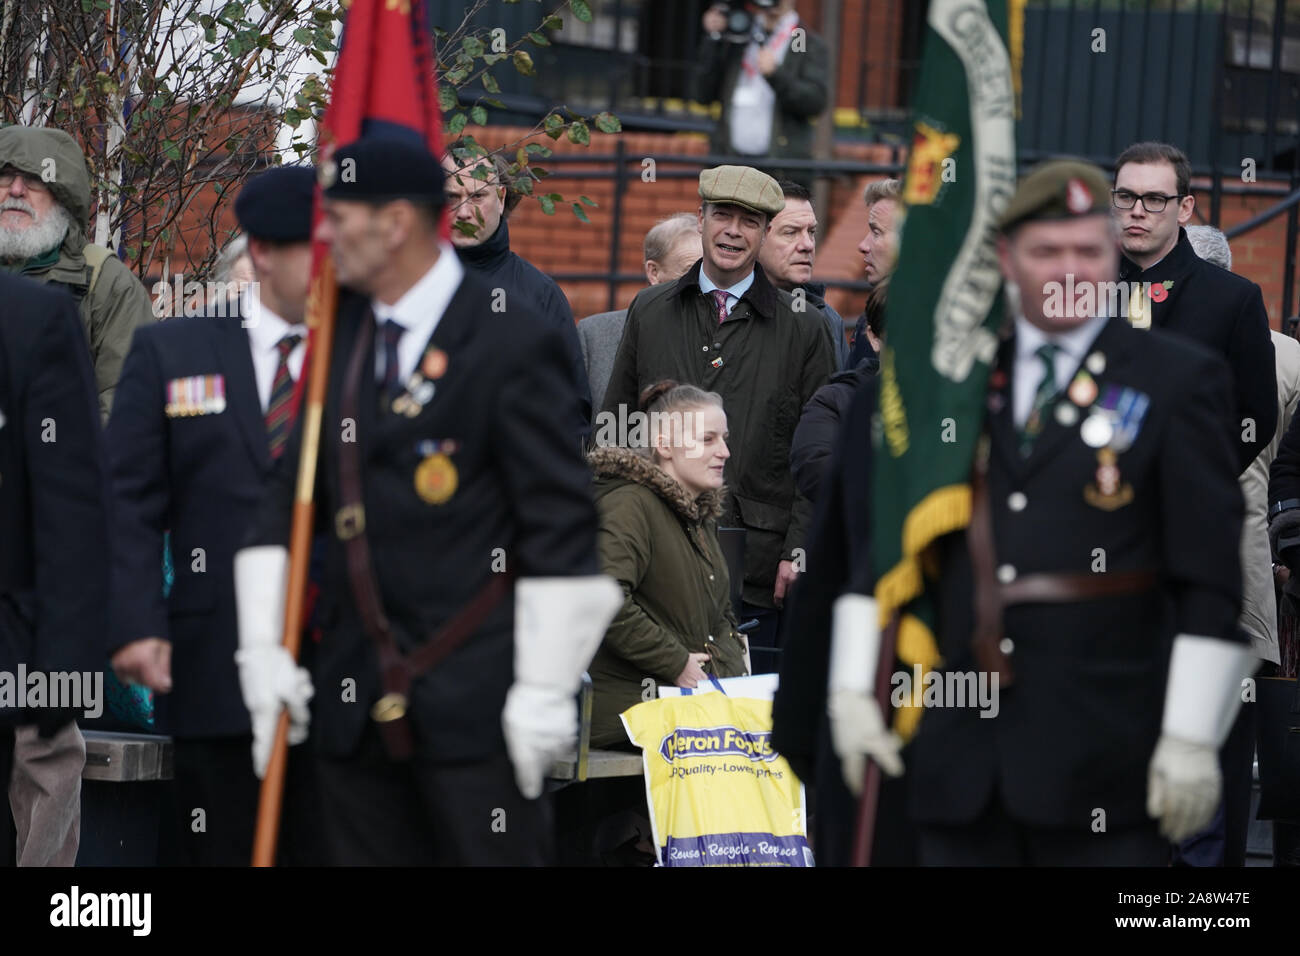 Brexit Party leader Nigel Farage attending Hartlepool War Memorial commemoration on the anniversary of Armistice Dayl. Stock Photo